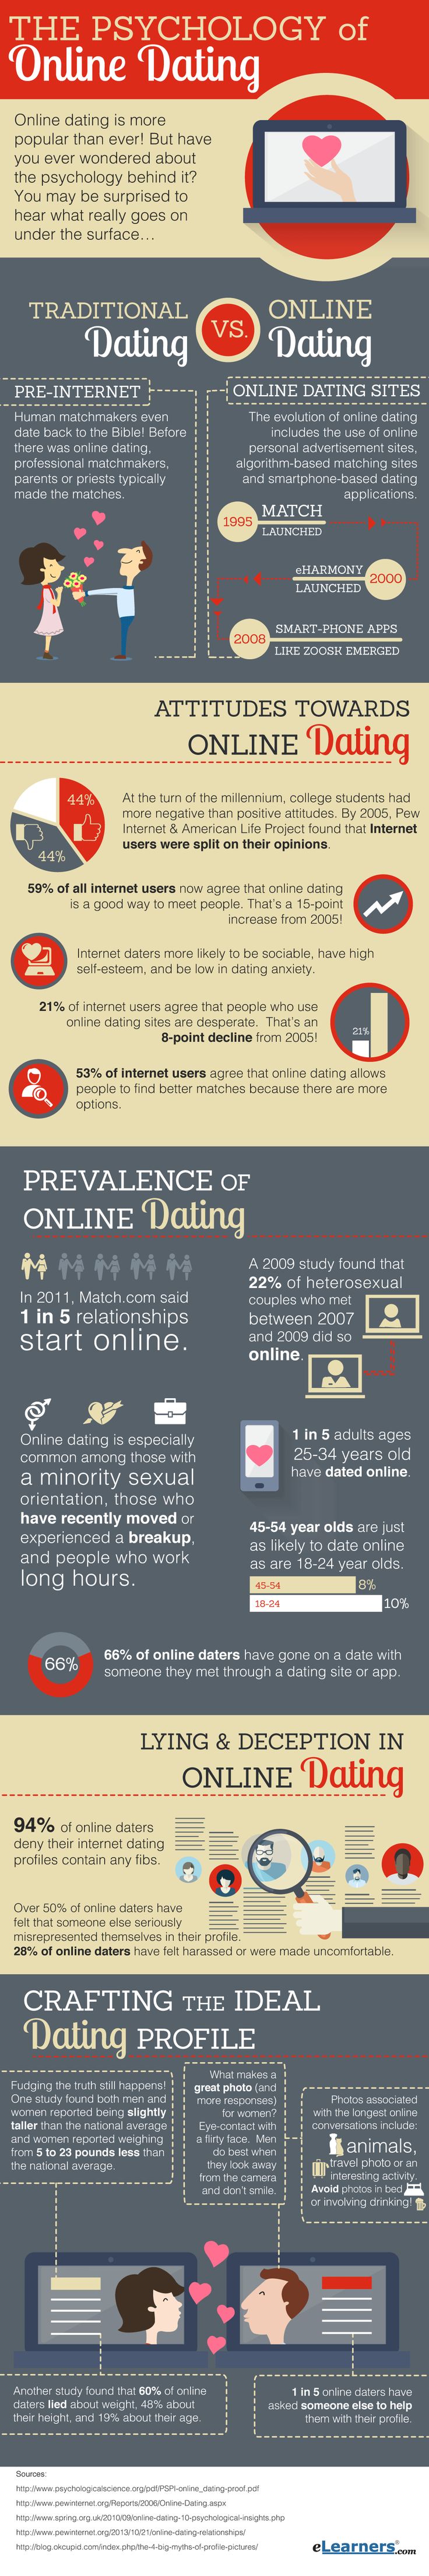 Online Dating Research: Statistics, Scams, Pros and Cons | Kaspersky ...